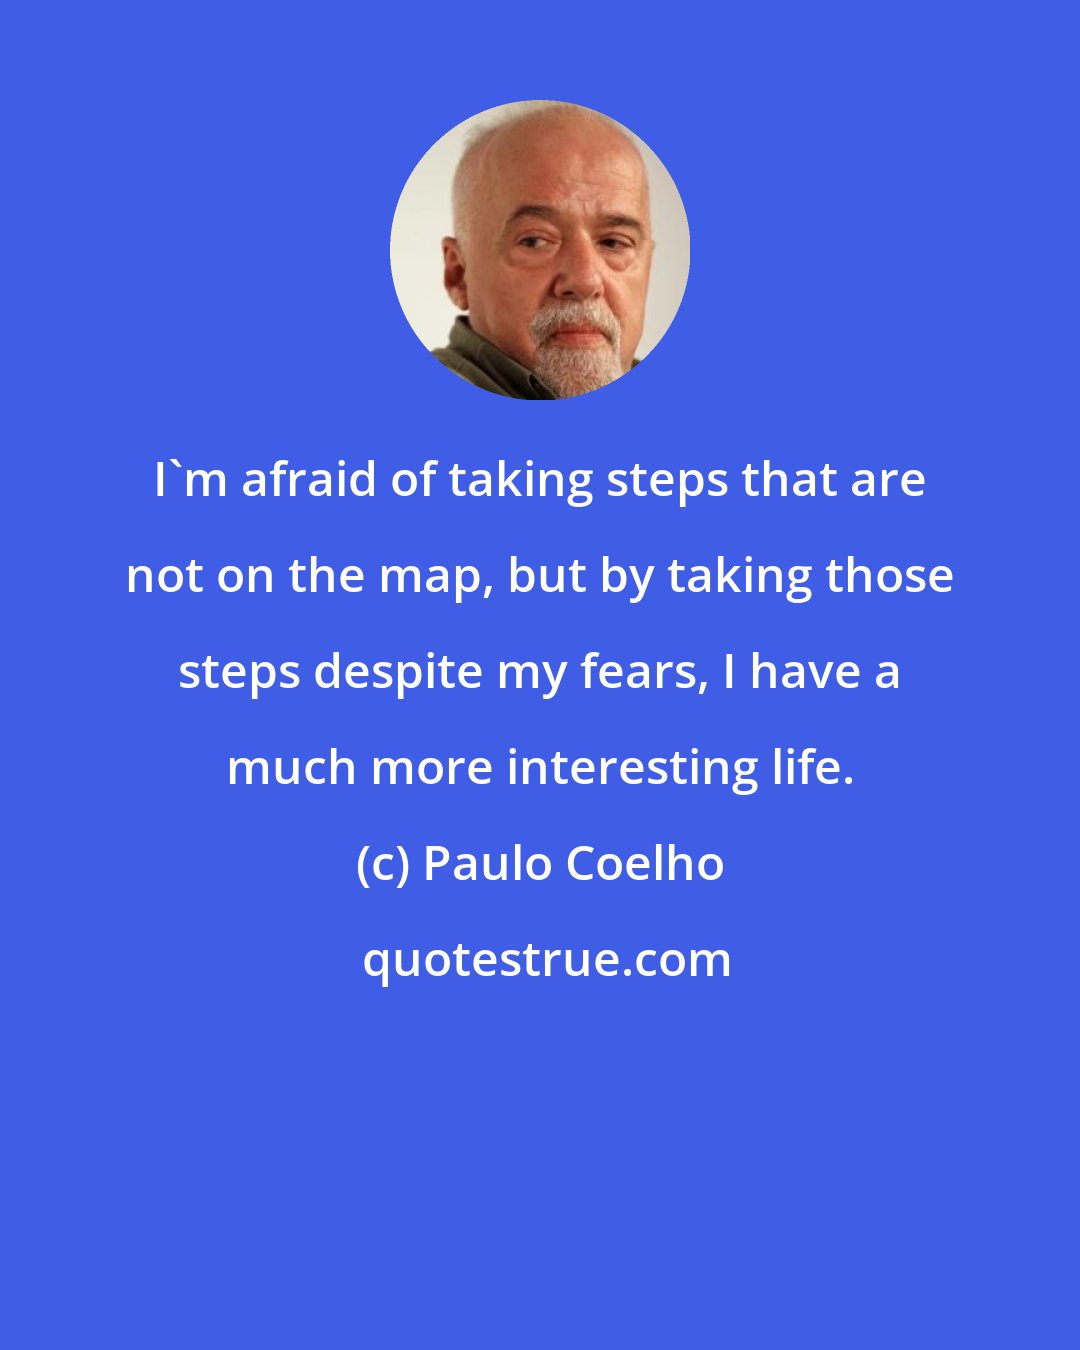 Paulo Coelho: I'm afraid of taking steps that are not on the map, but by taking those steps despite my fears, I have a much more interesting life.